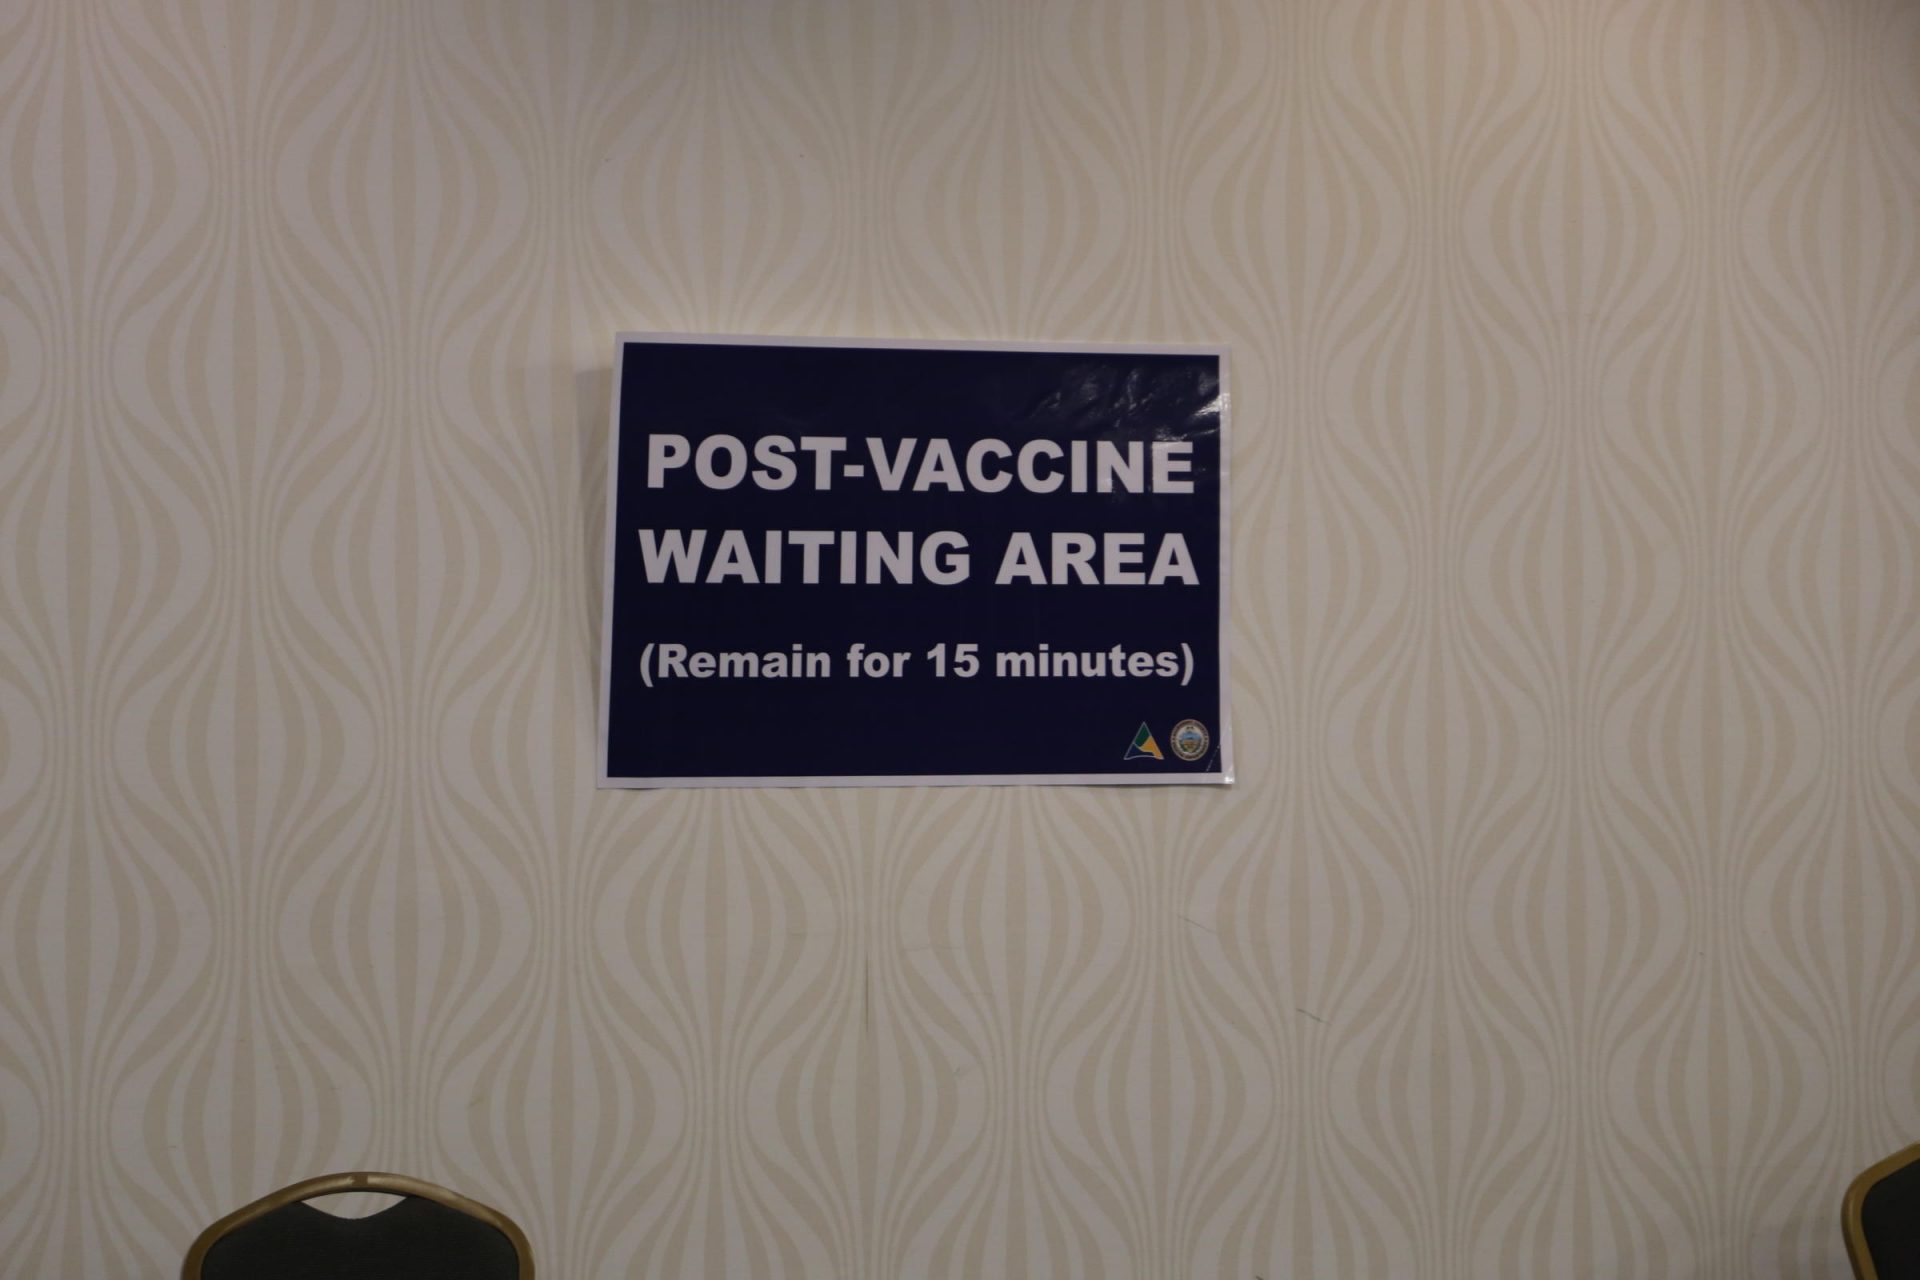 A sign marks the waiting area for people who received a COVID-19 vaccine. The 15-minute waiting period is a precaution because some people who received initial doses of the vaccine developed allergic reactions.